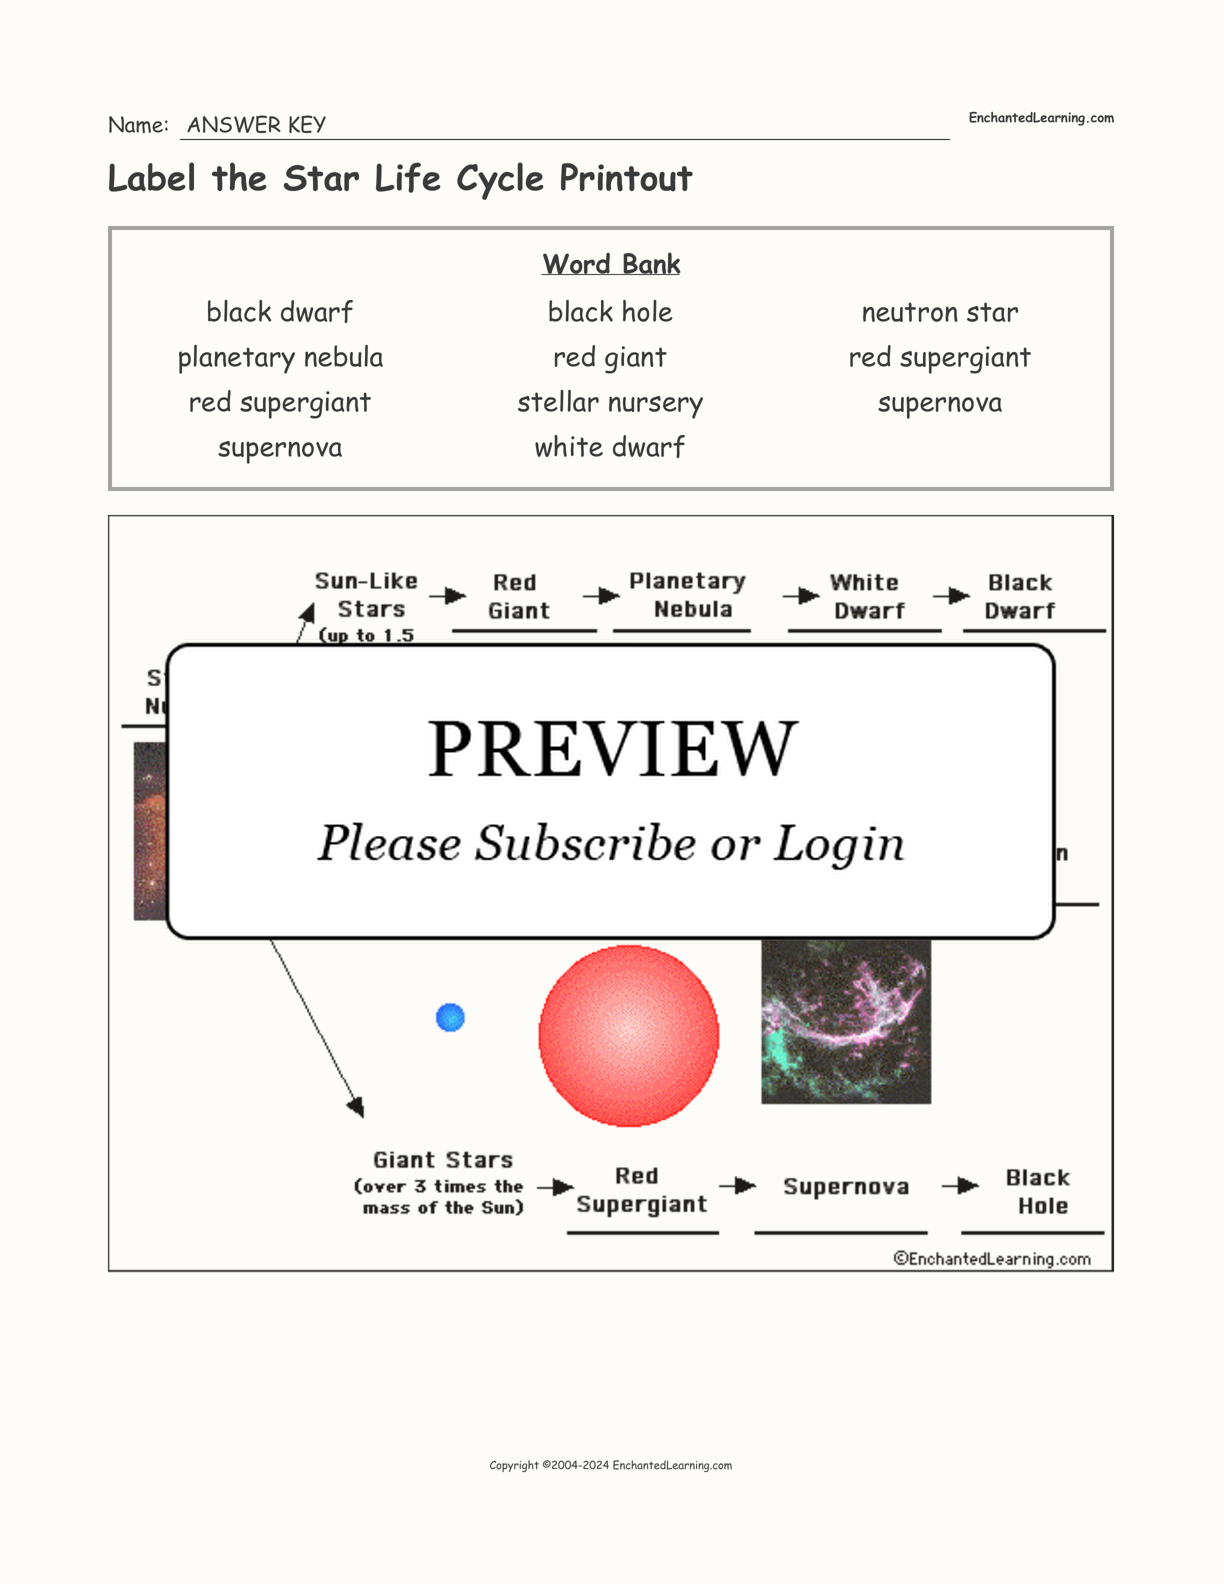 Label the Star Life Cycle Printout interactive worksheet page 2